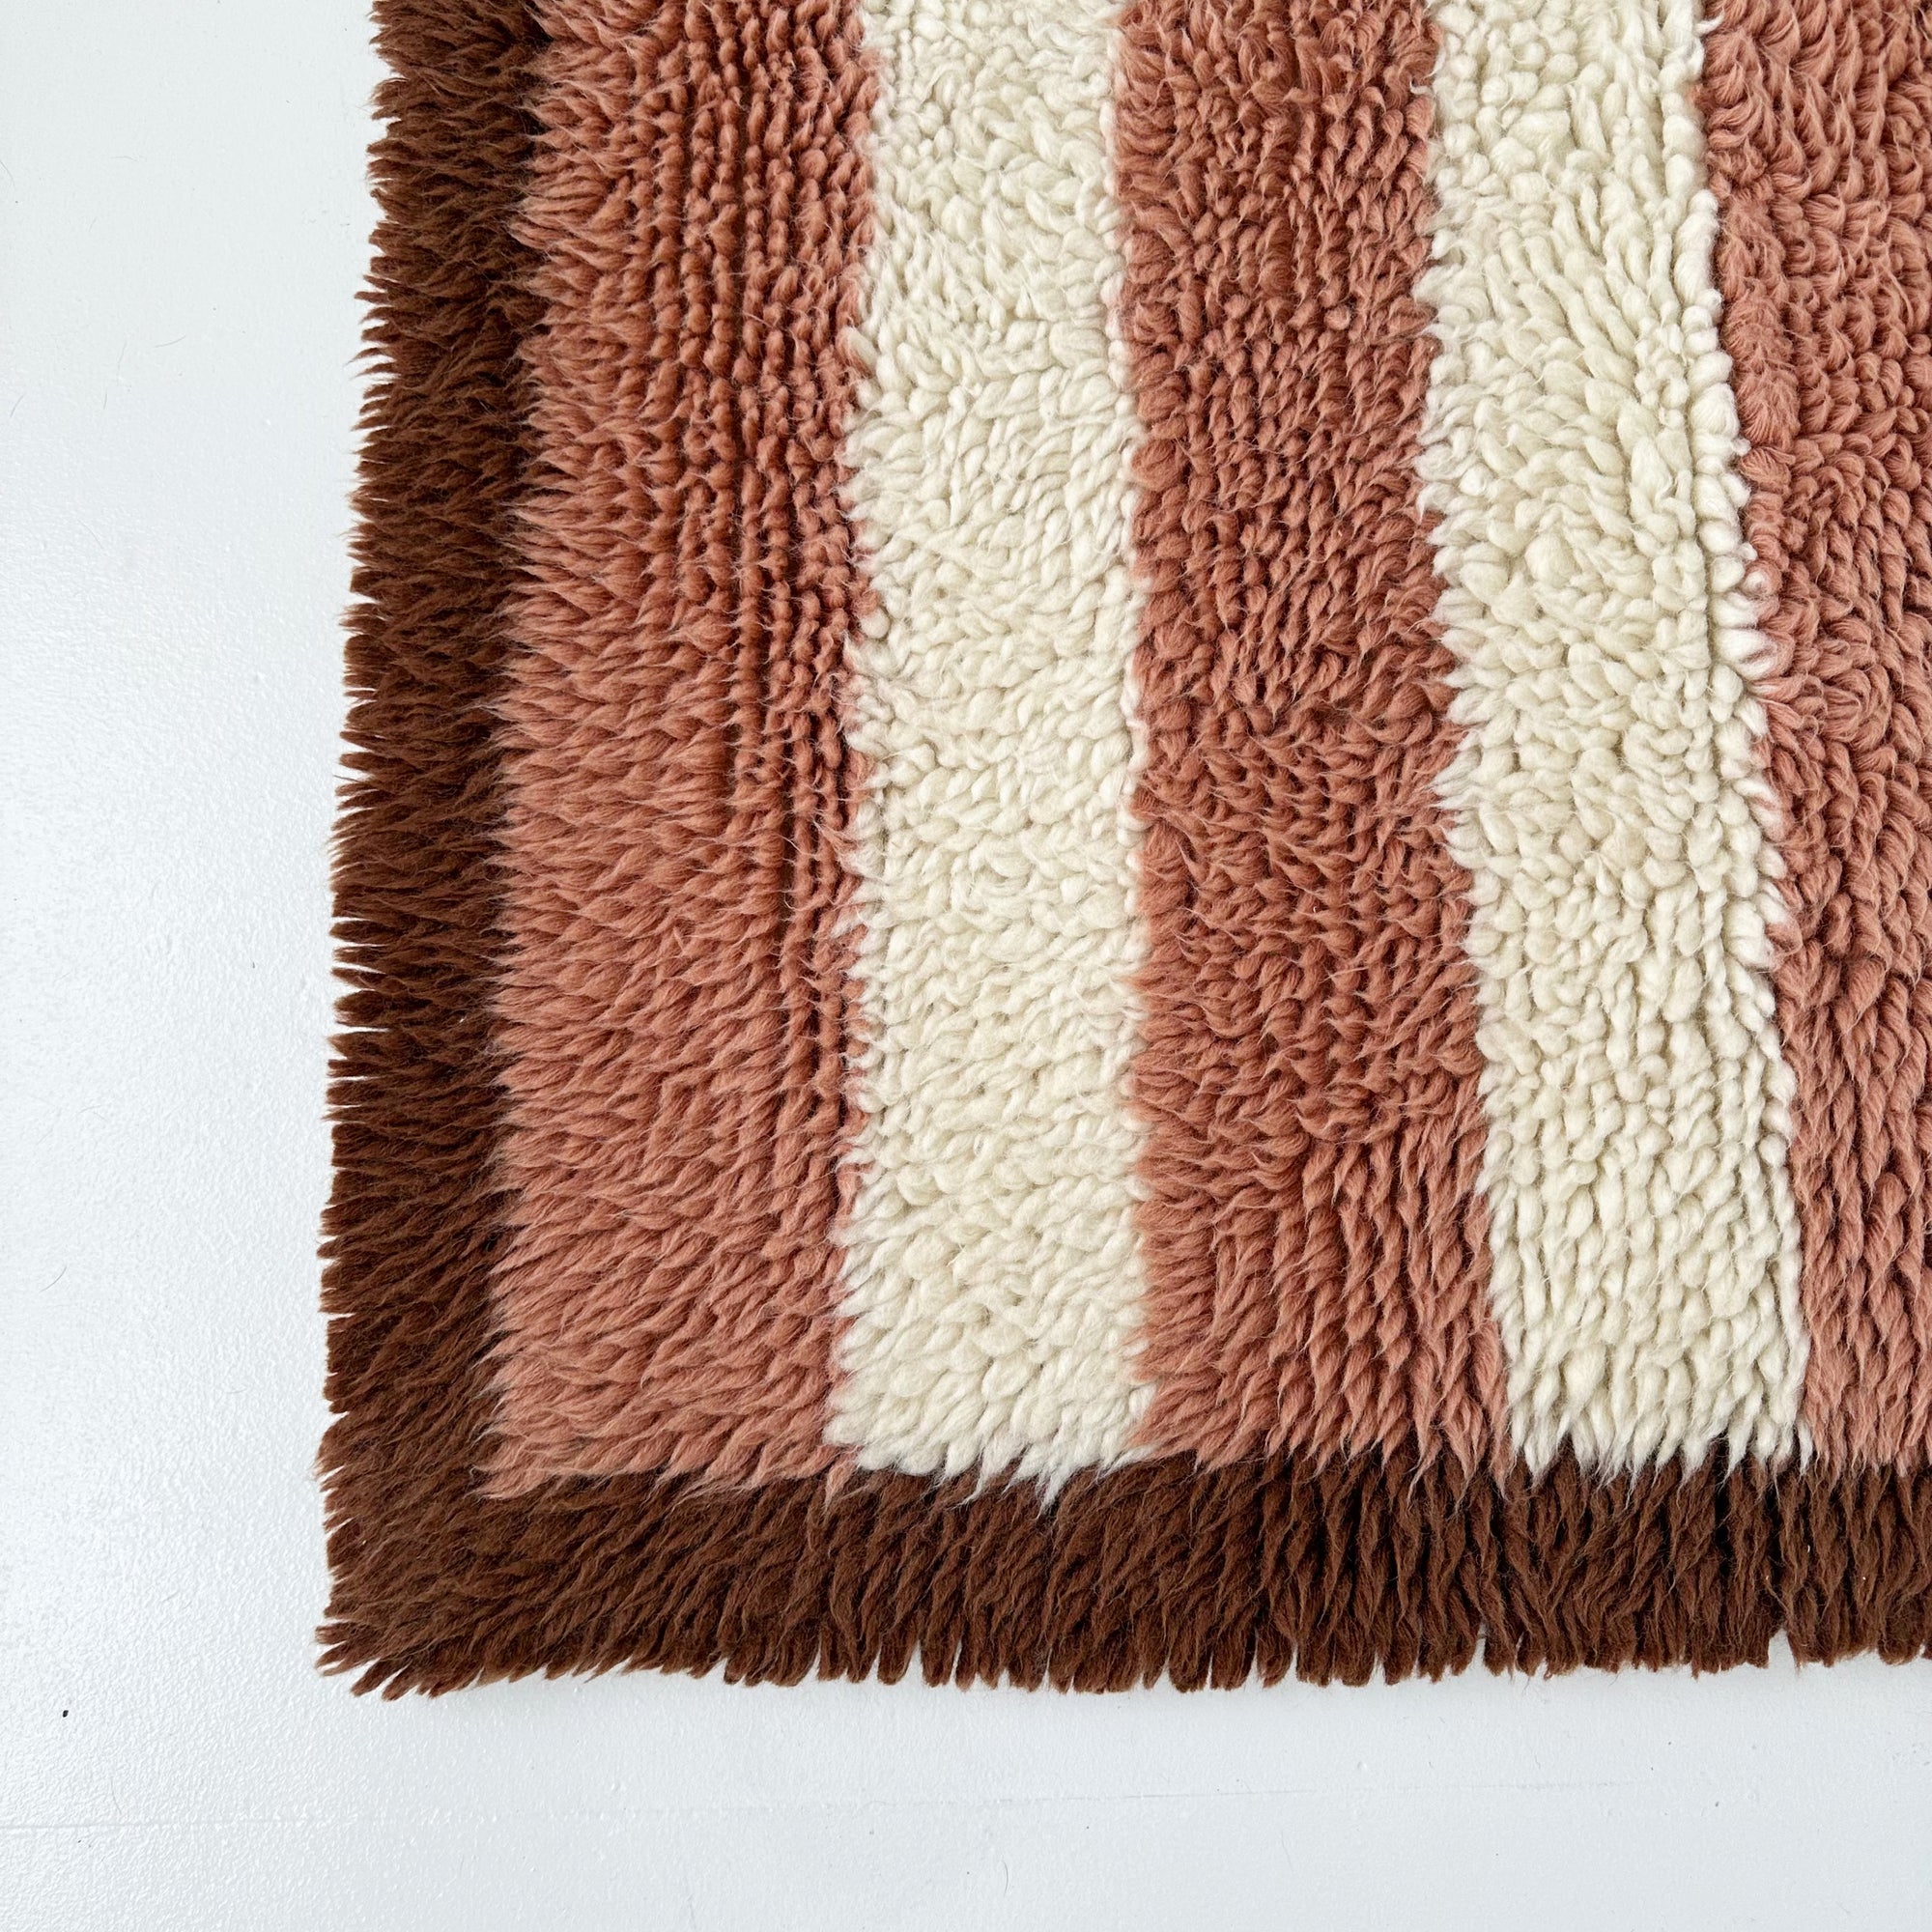 BONNIE AND NEIL STRIPE COCOA RUG: MED